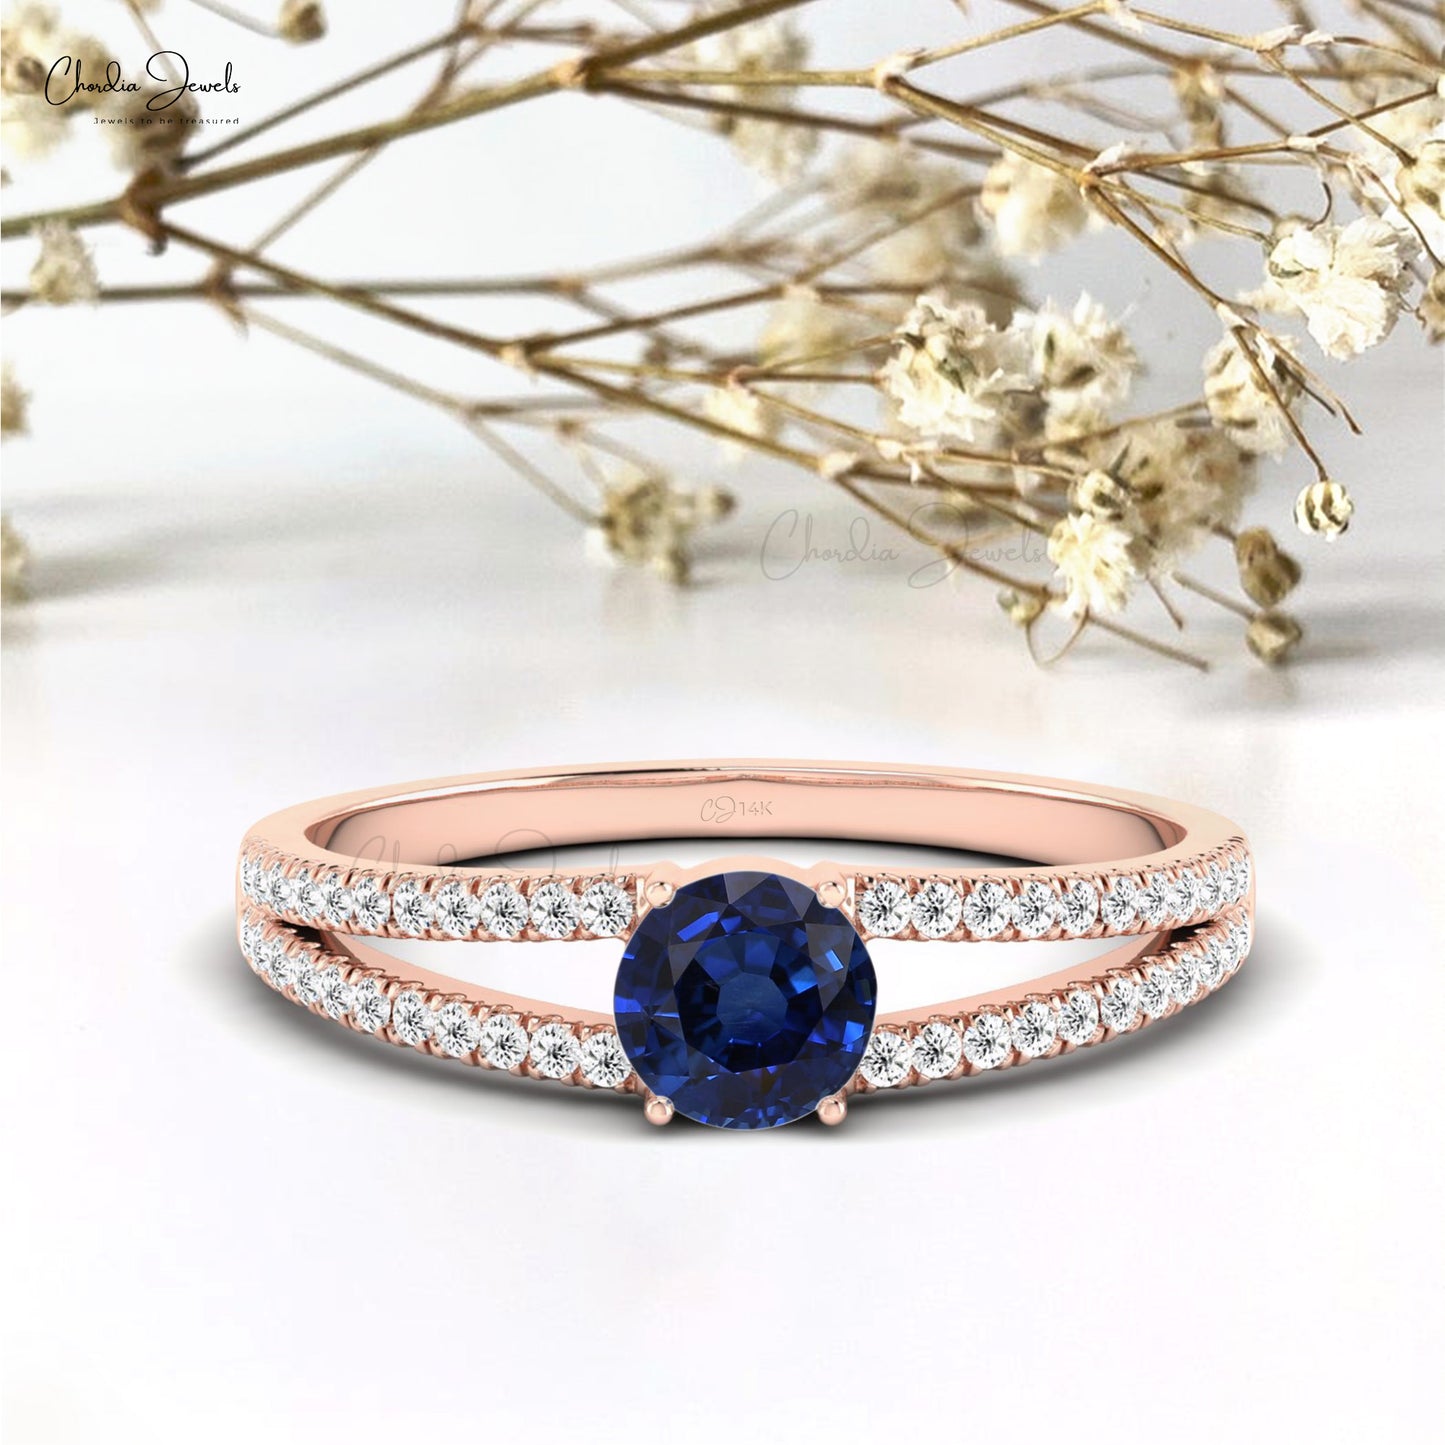 Genuine Blue Sapphire Dainty Wedding Ring 0.9mm Round Cut Diamond Promise Ring 14k Real Gold Art Deco Jewelry For Birthday Gift